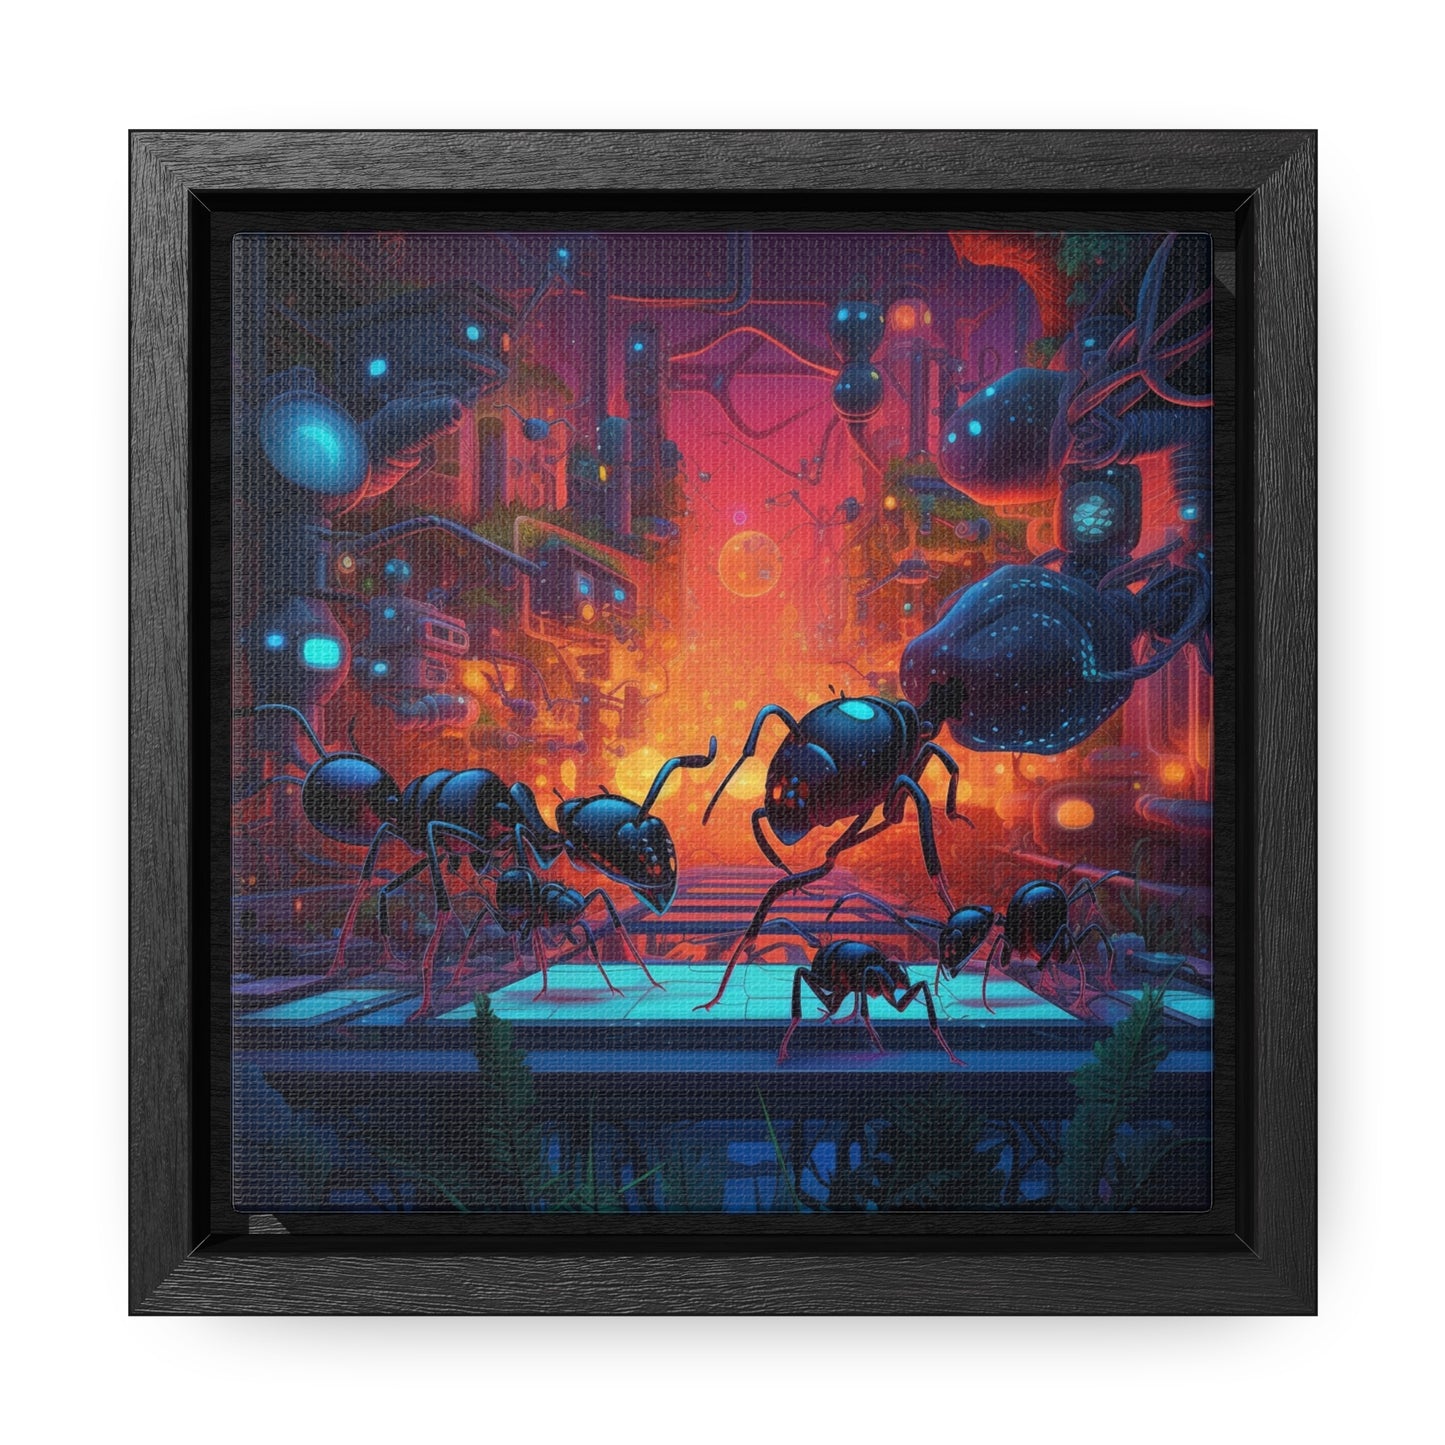 Gallery Canvas Wraps, Square Frame Ants Home 2